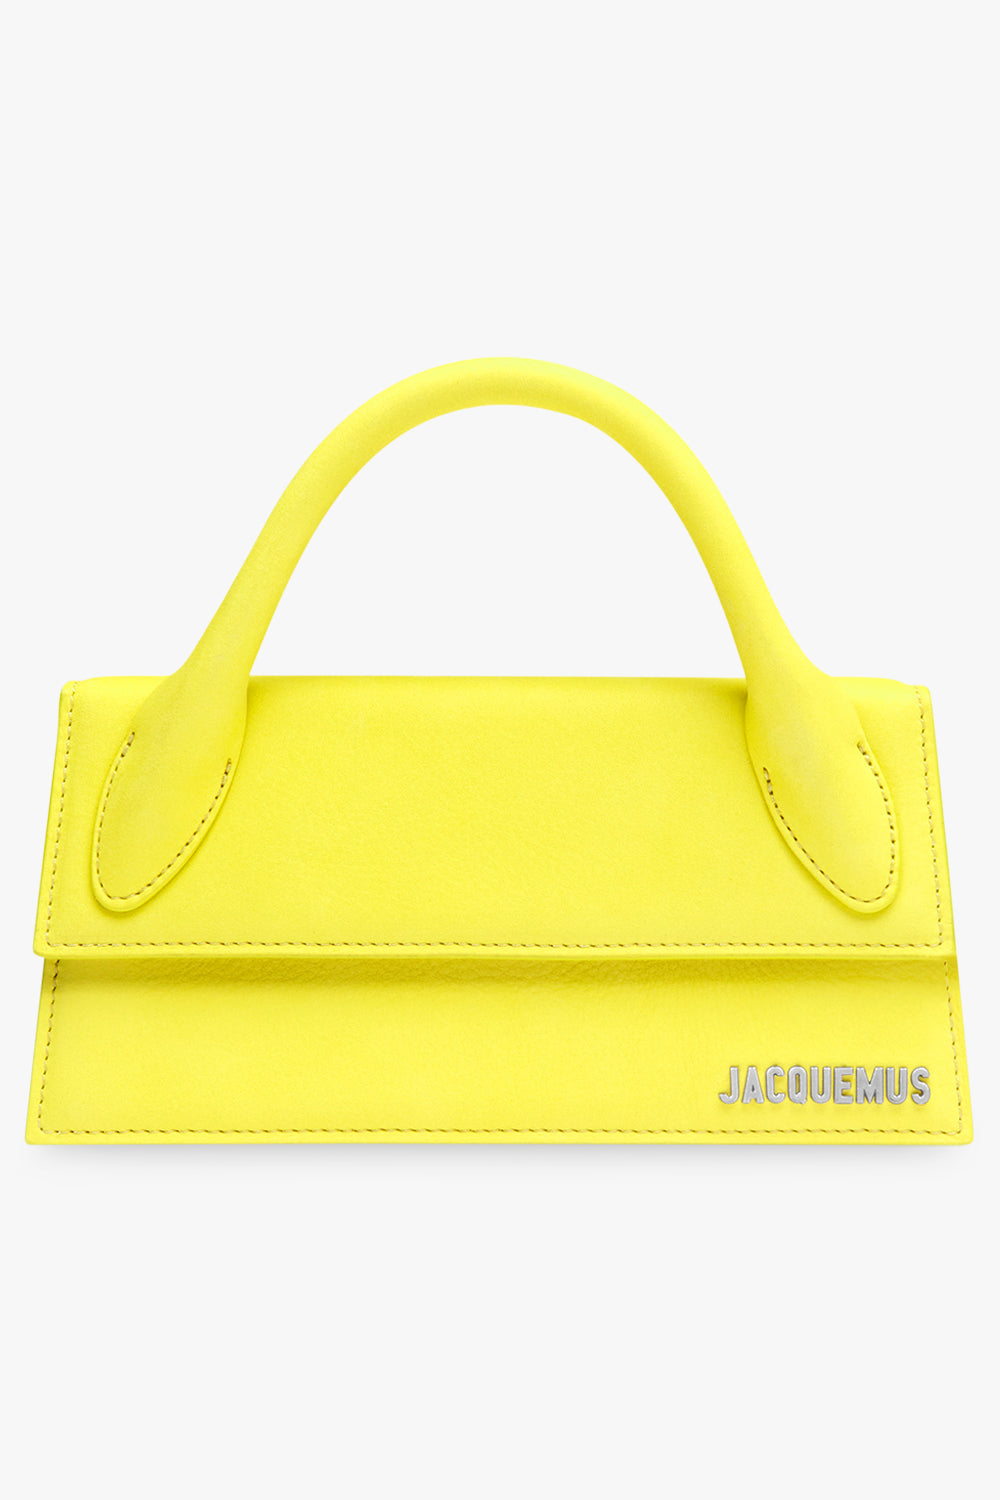 Le Chiquito Long Leather Shoulder Bag in Yellow - Jacquemus